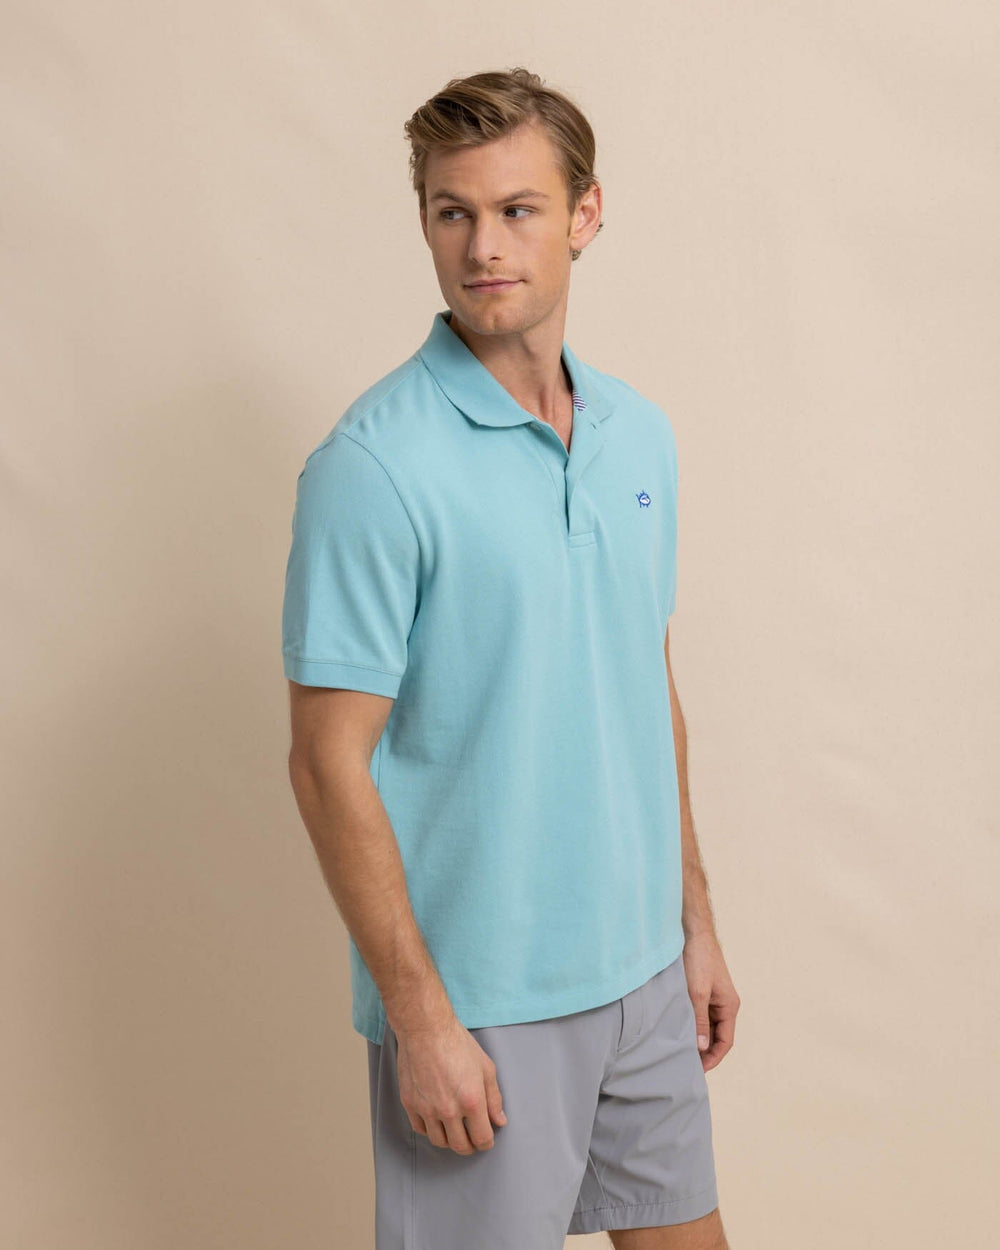 The front view of the Southern Tide new-skipjack-polo-shirt by Southern Tide - Marine Blue